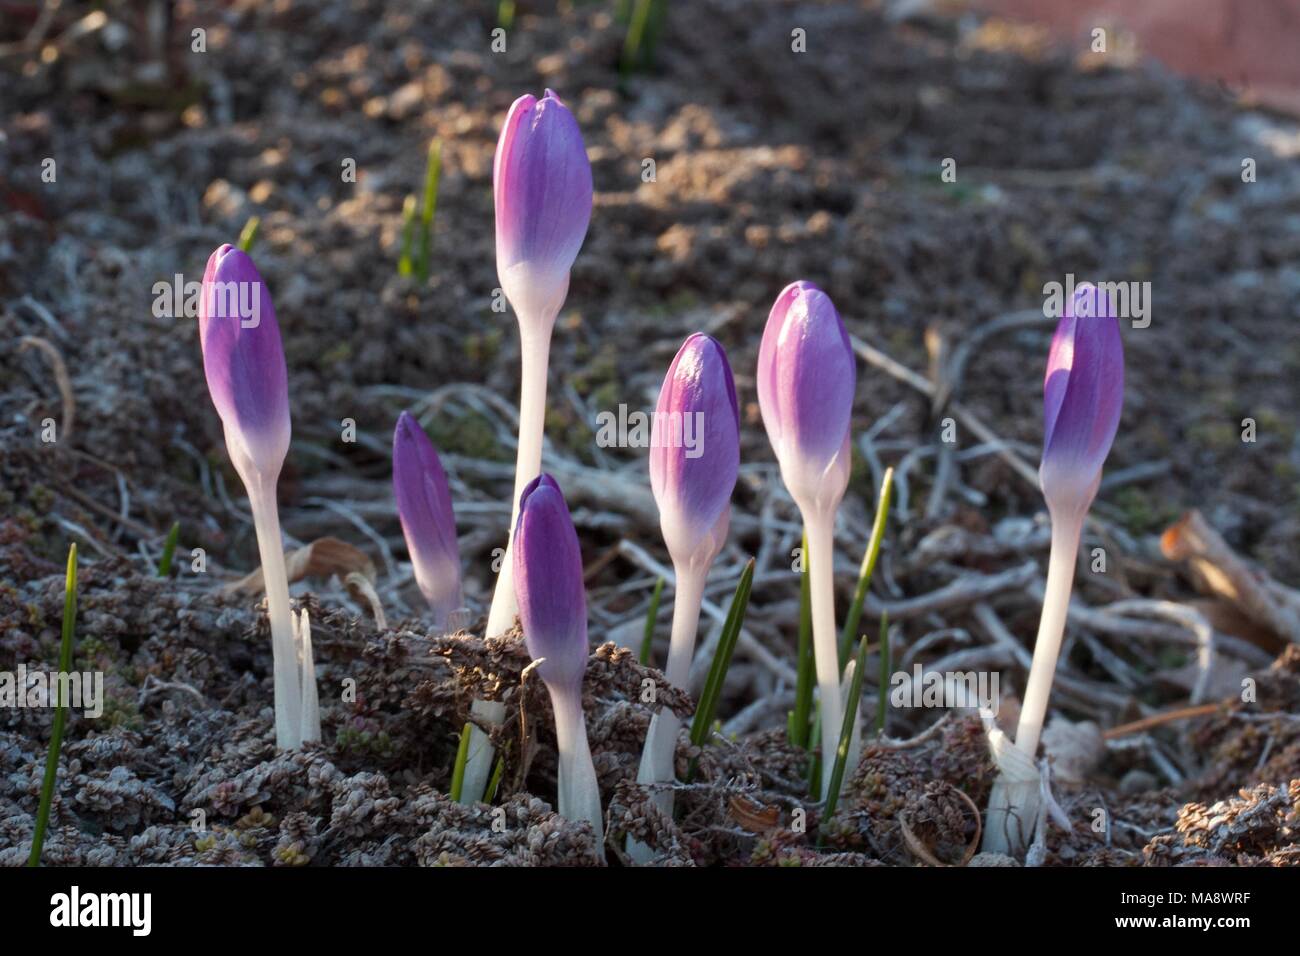 Newly emerged species crocus in bud stage. Stock Photo